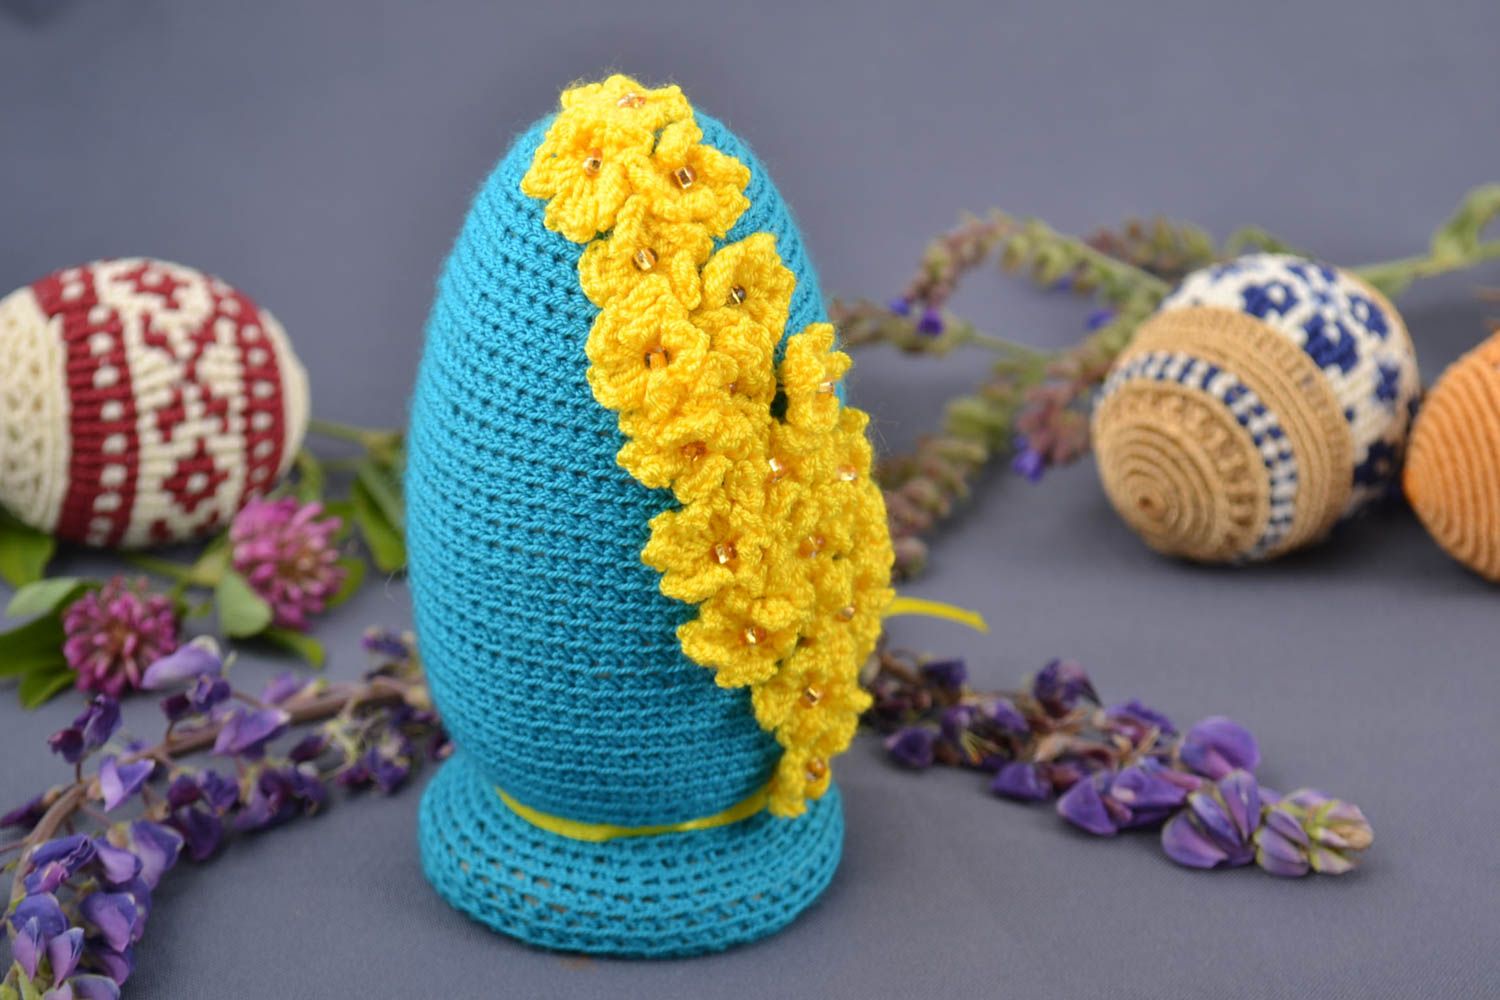 Handmade decorative macrame Easter egg on wooden basis blue with yellow flowers photo 1